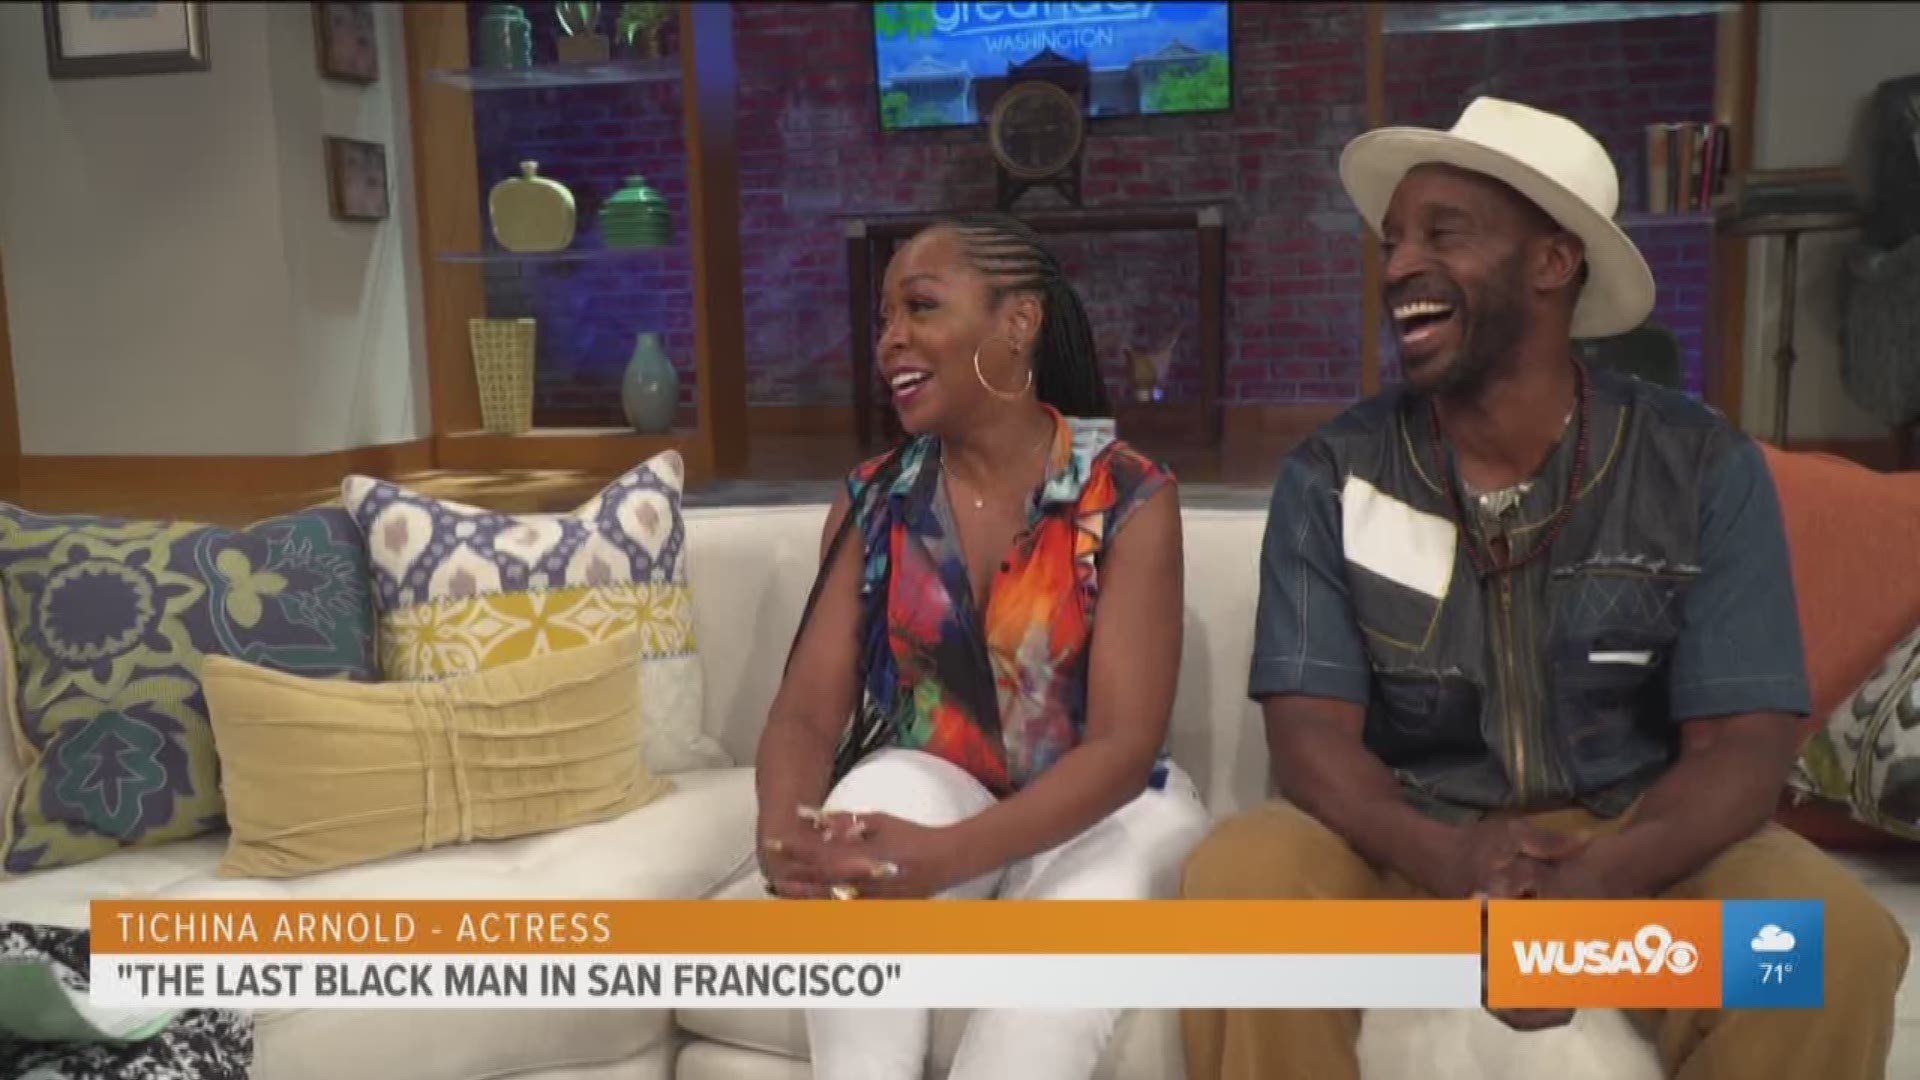 Actress Tichina Arnold and actor Rob Morgan share the important message of the new film "The Last Black Man in San Francisco". It's a story that shares the relationships we hold with people and with our home towns, and the work it takes to keep both.